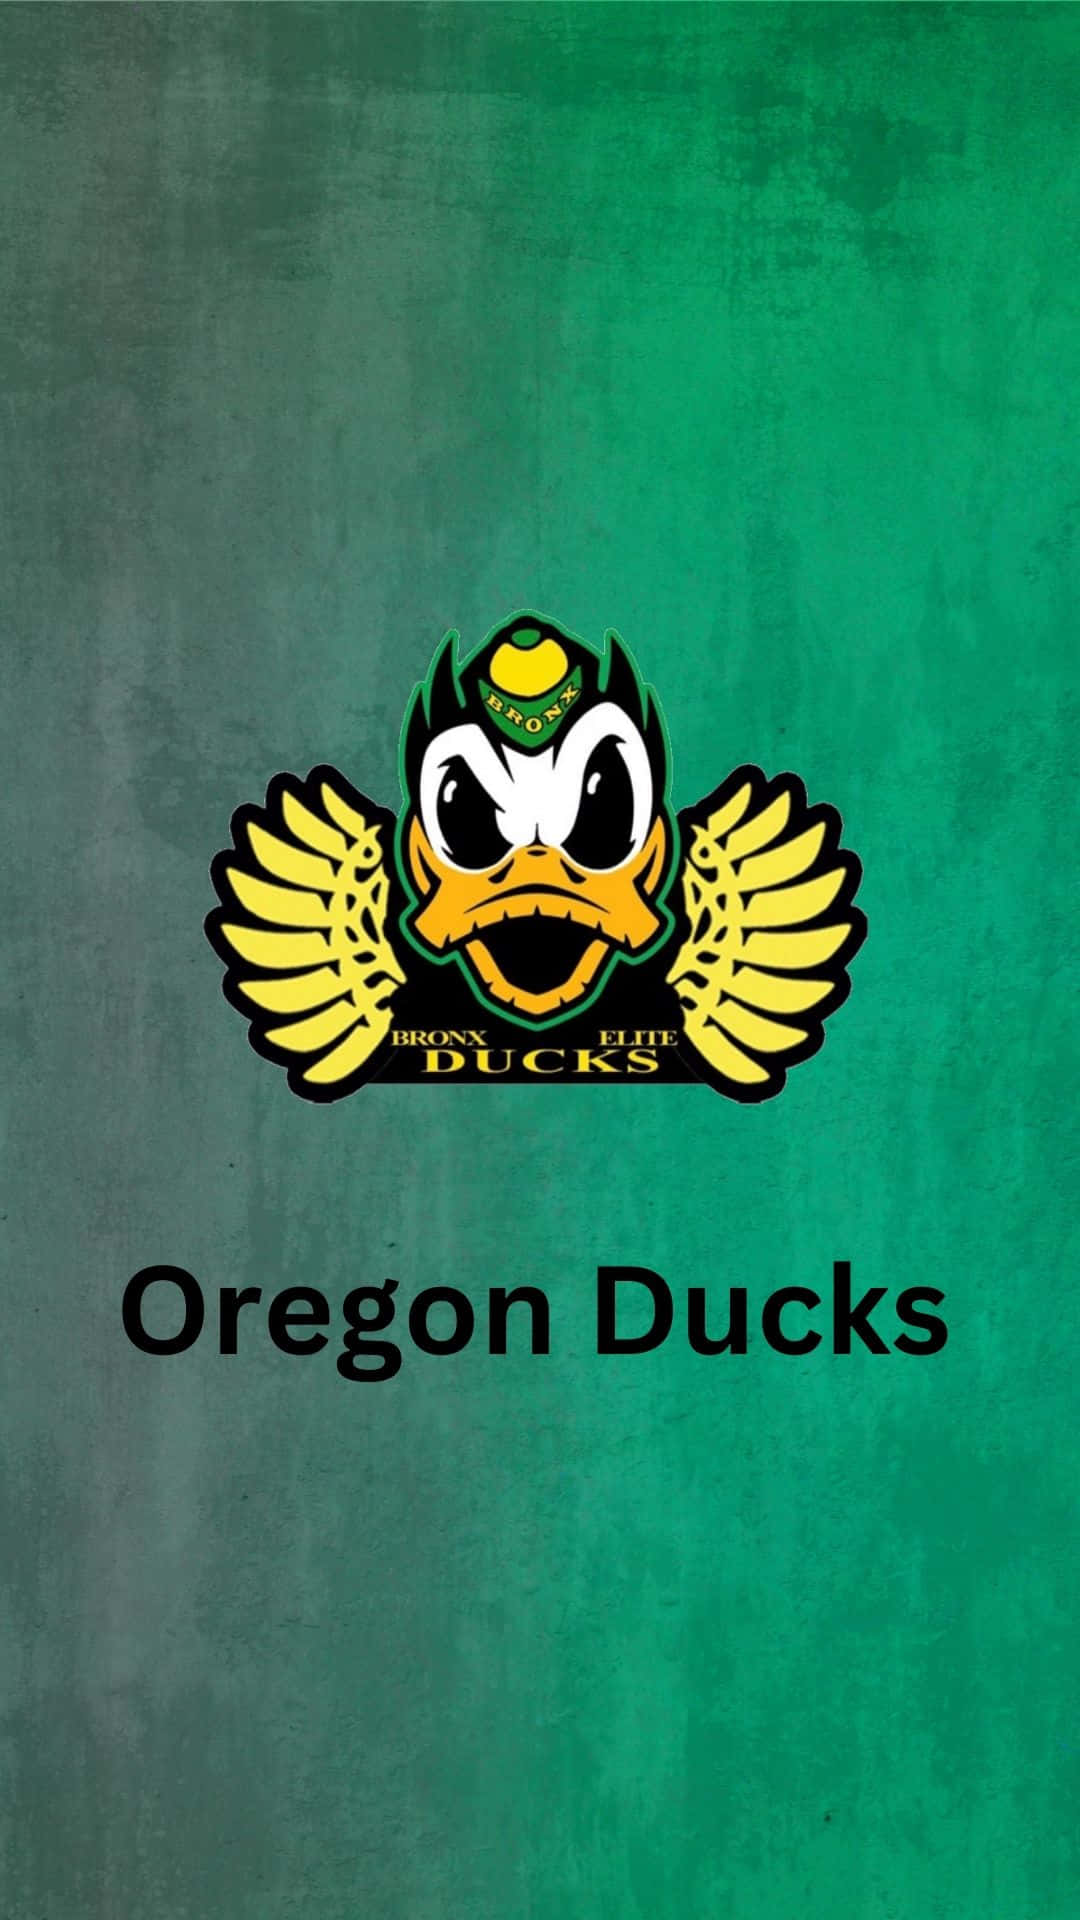 Exciting Oregon Ducks Football Game Moment Background